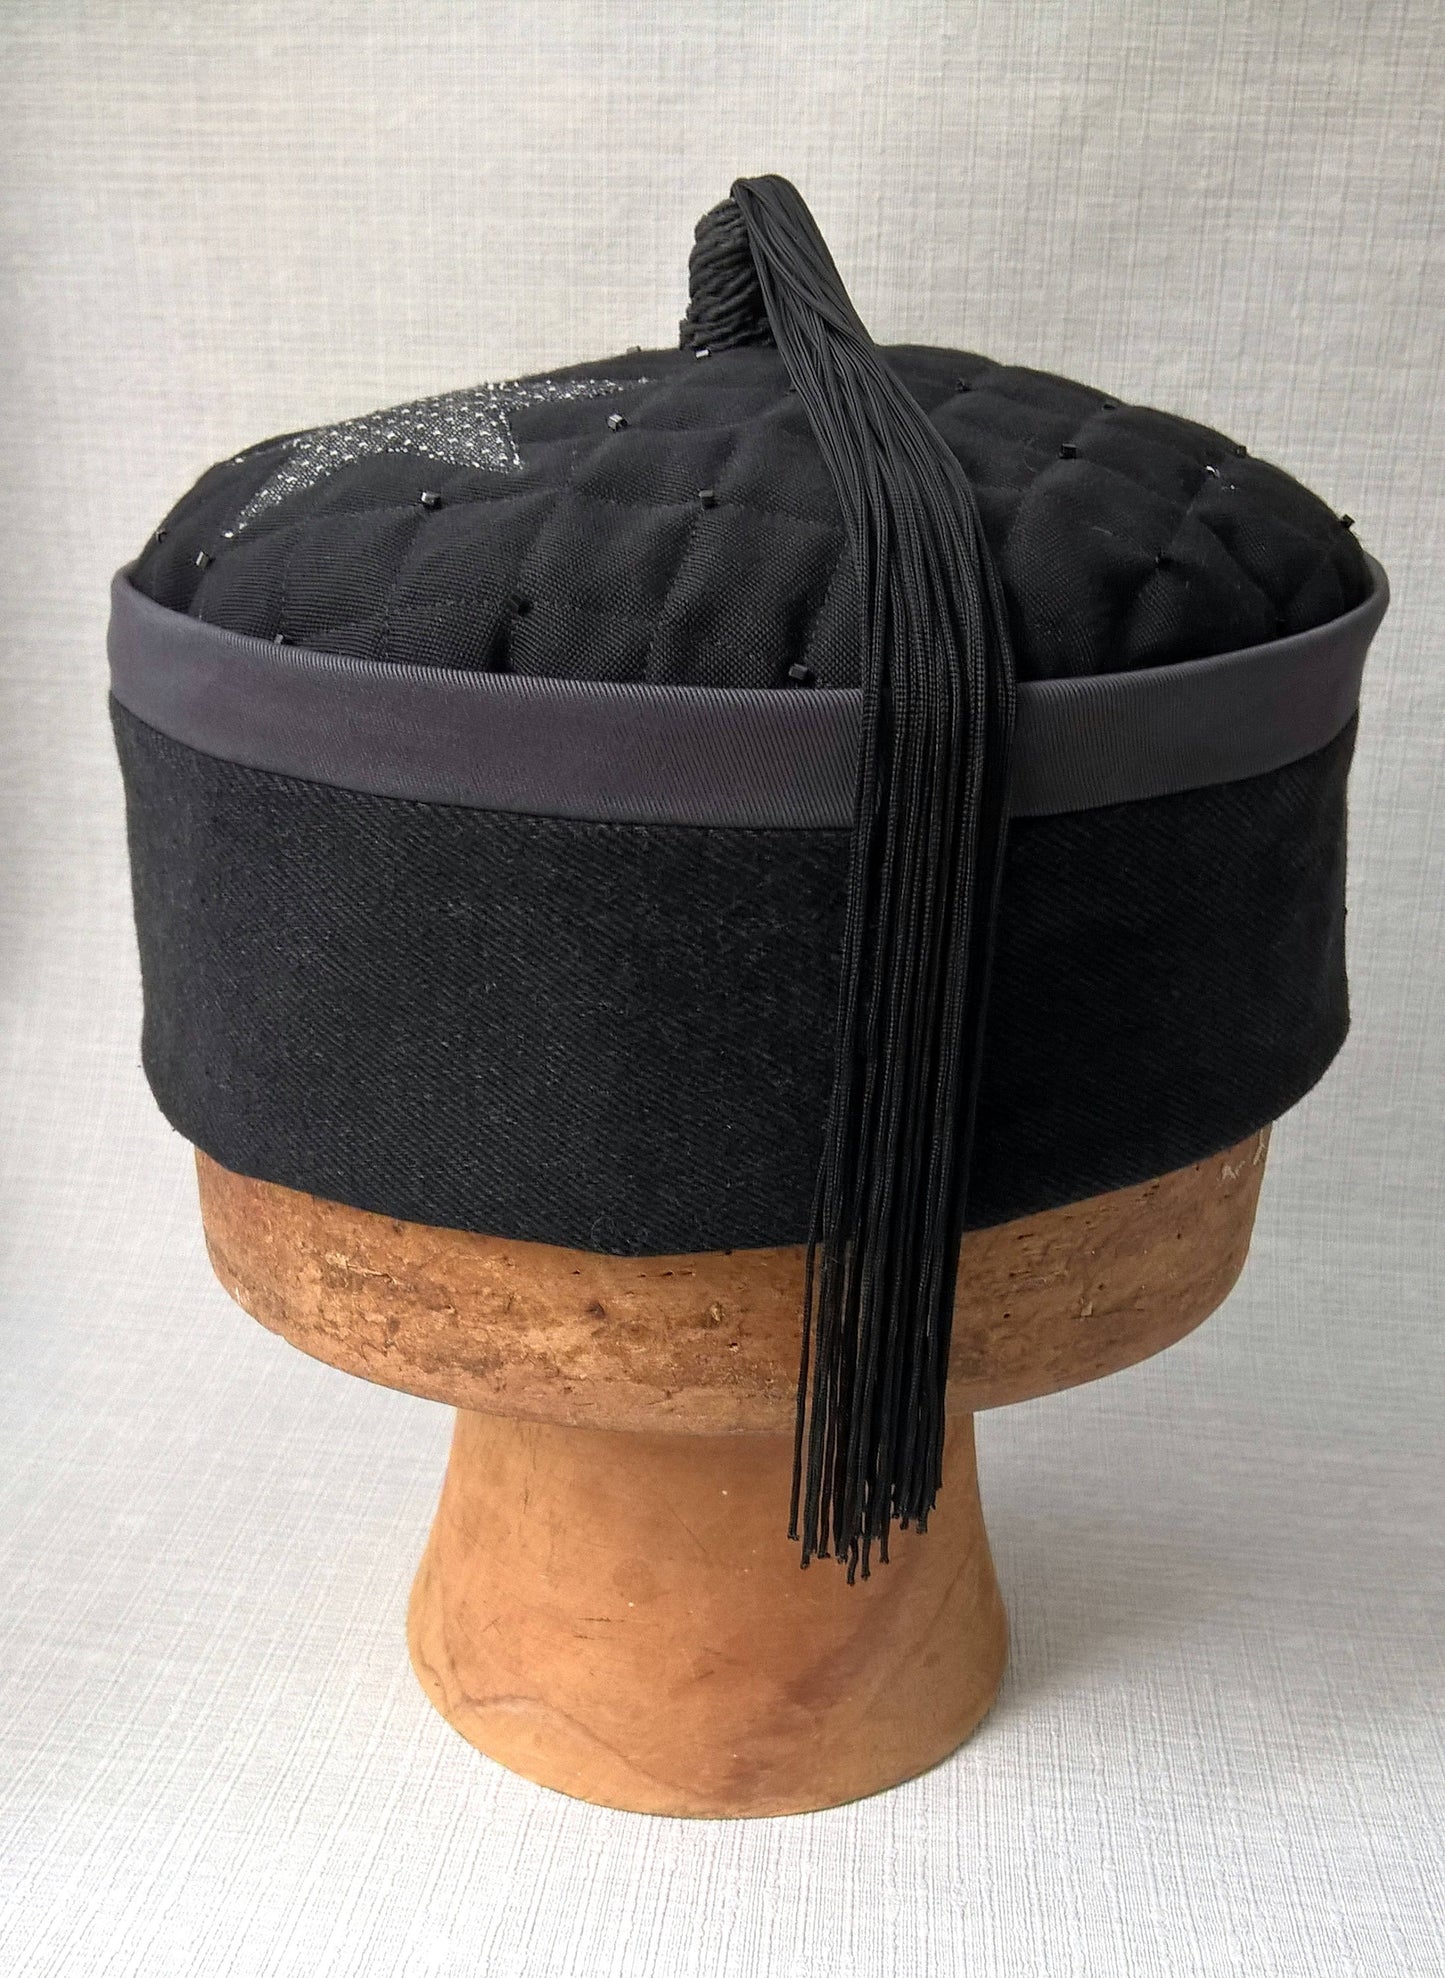 A beautiful tassel crafted from vintage black fringing completes this mens smoking cap